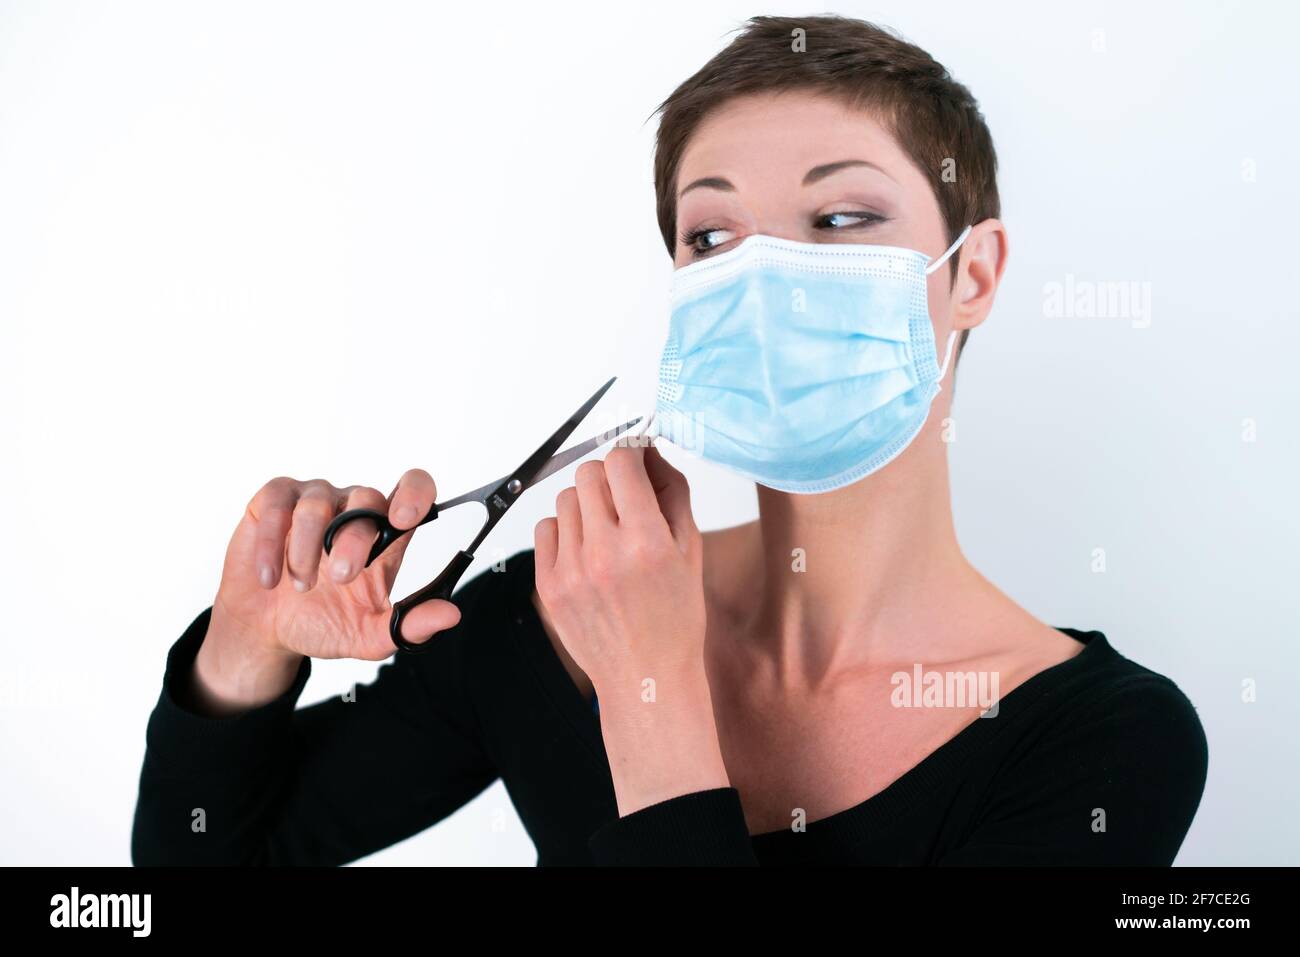 Beautiful woman with short hair removing her face mask with scissors. Life in quarantine. Dealing with coronavirus restrictions. Life during pandemic. Stock Photo